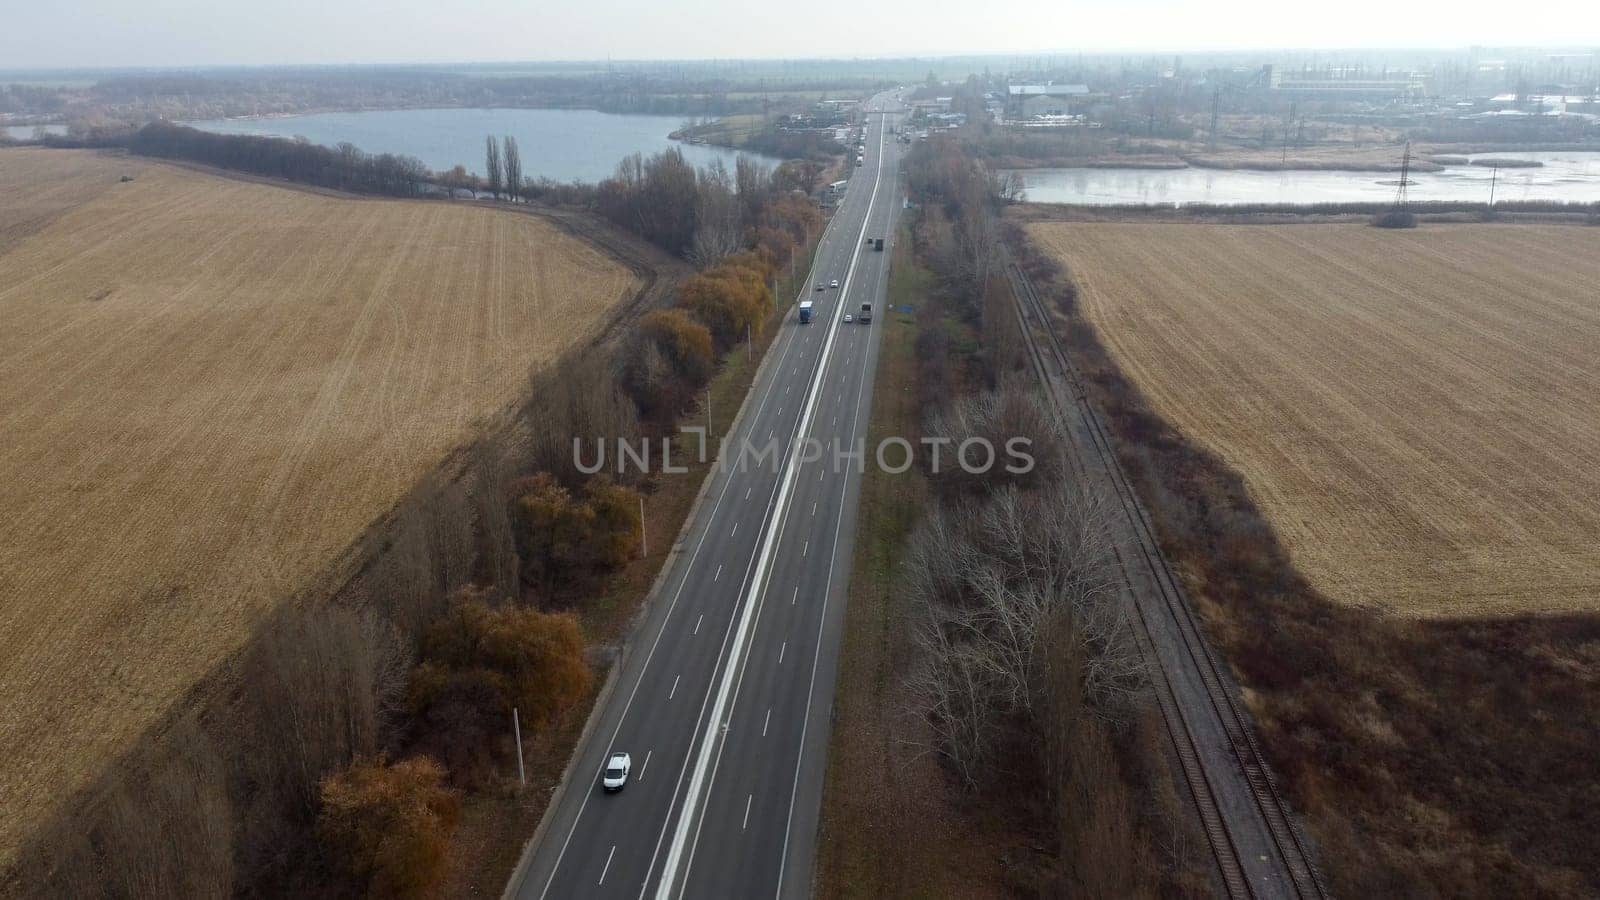 Large plowed field with plowed land and yellow dry straw after harvesting wheat, a lake, a highway with driving cars on an autumn day. Agro industrial agricultural farm landscape. Aerial drone view.